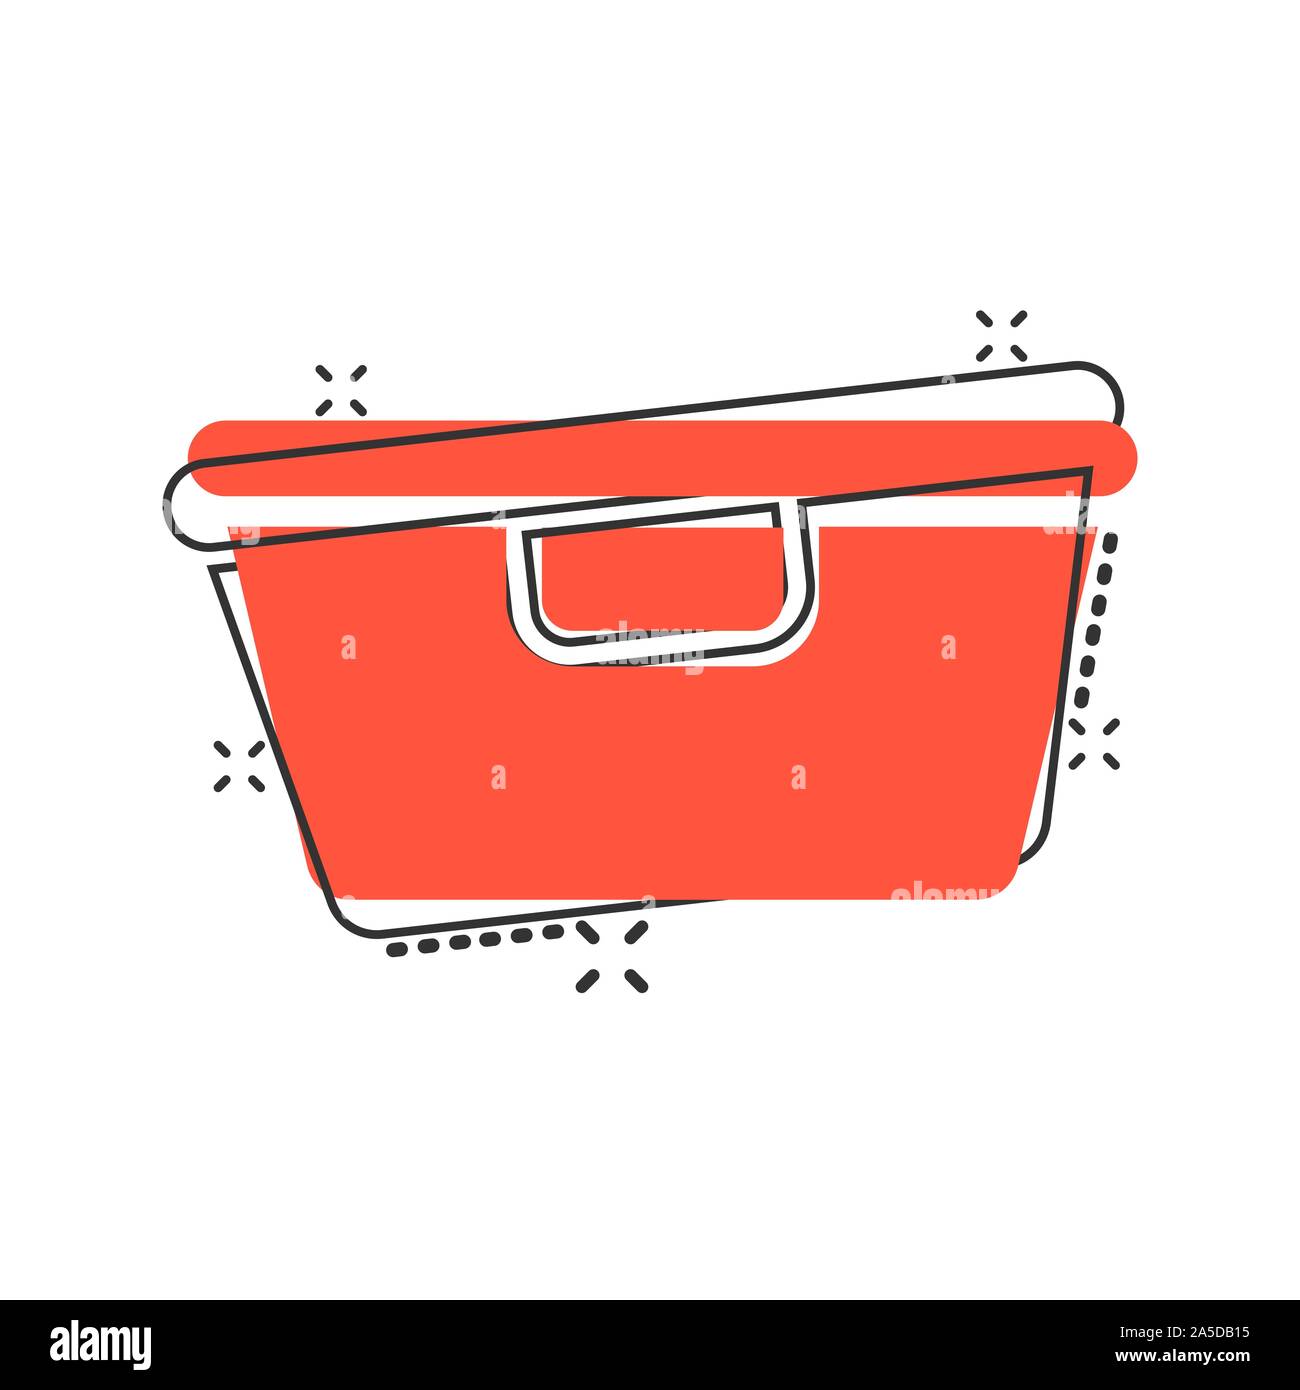 Food container icon in comic style. Kitchen bowl vector cartoon illustration pictogram splash effect. Stock Vector